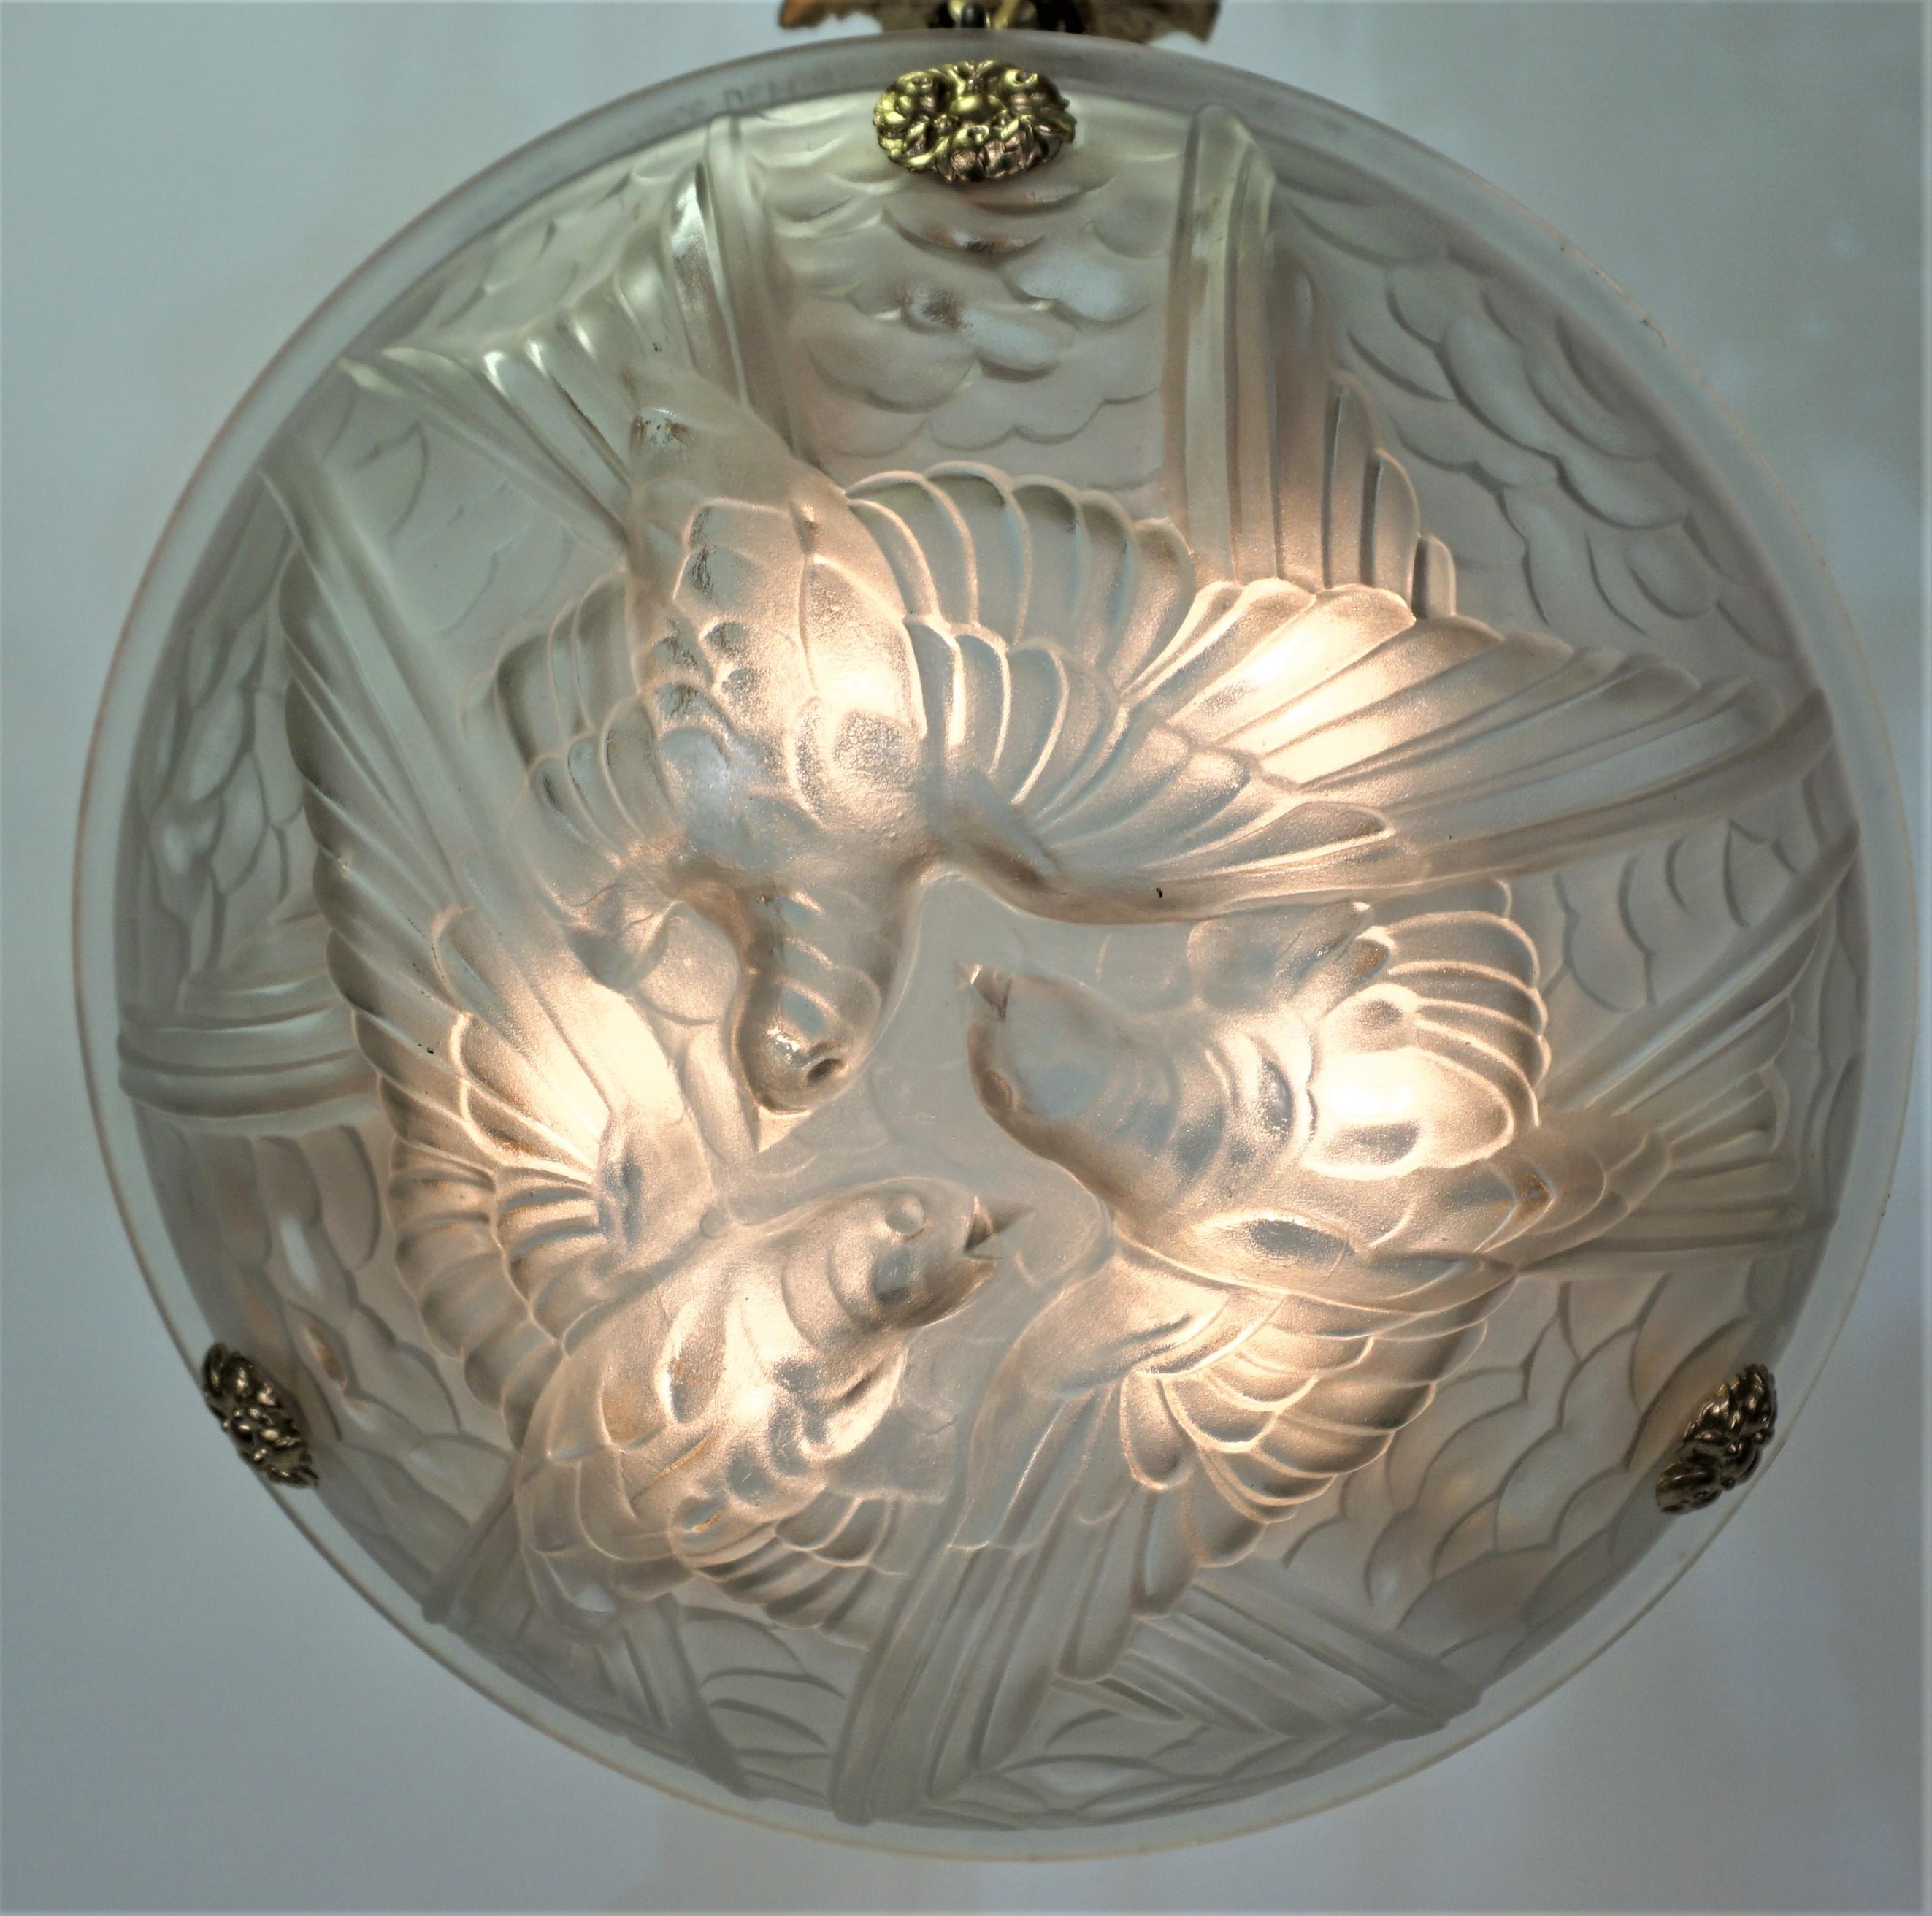 Frosted clear glass with bronze hardware Art Deco chandelier.
Six-light max 75watts max each.